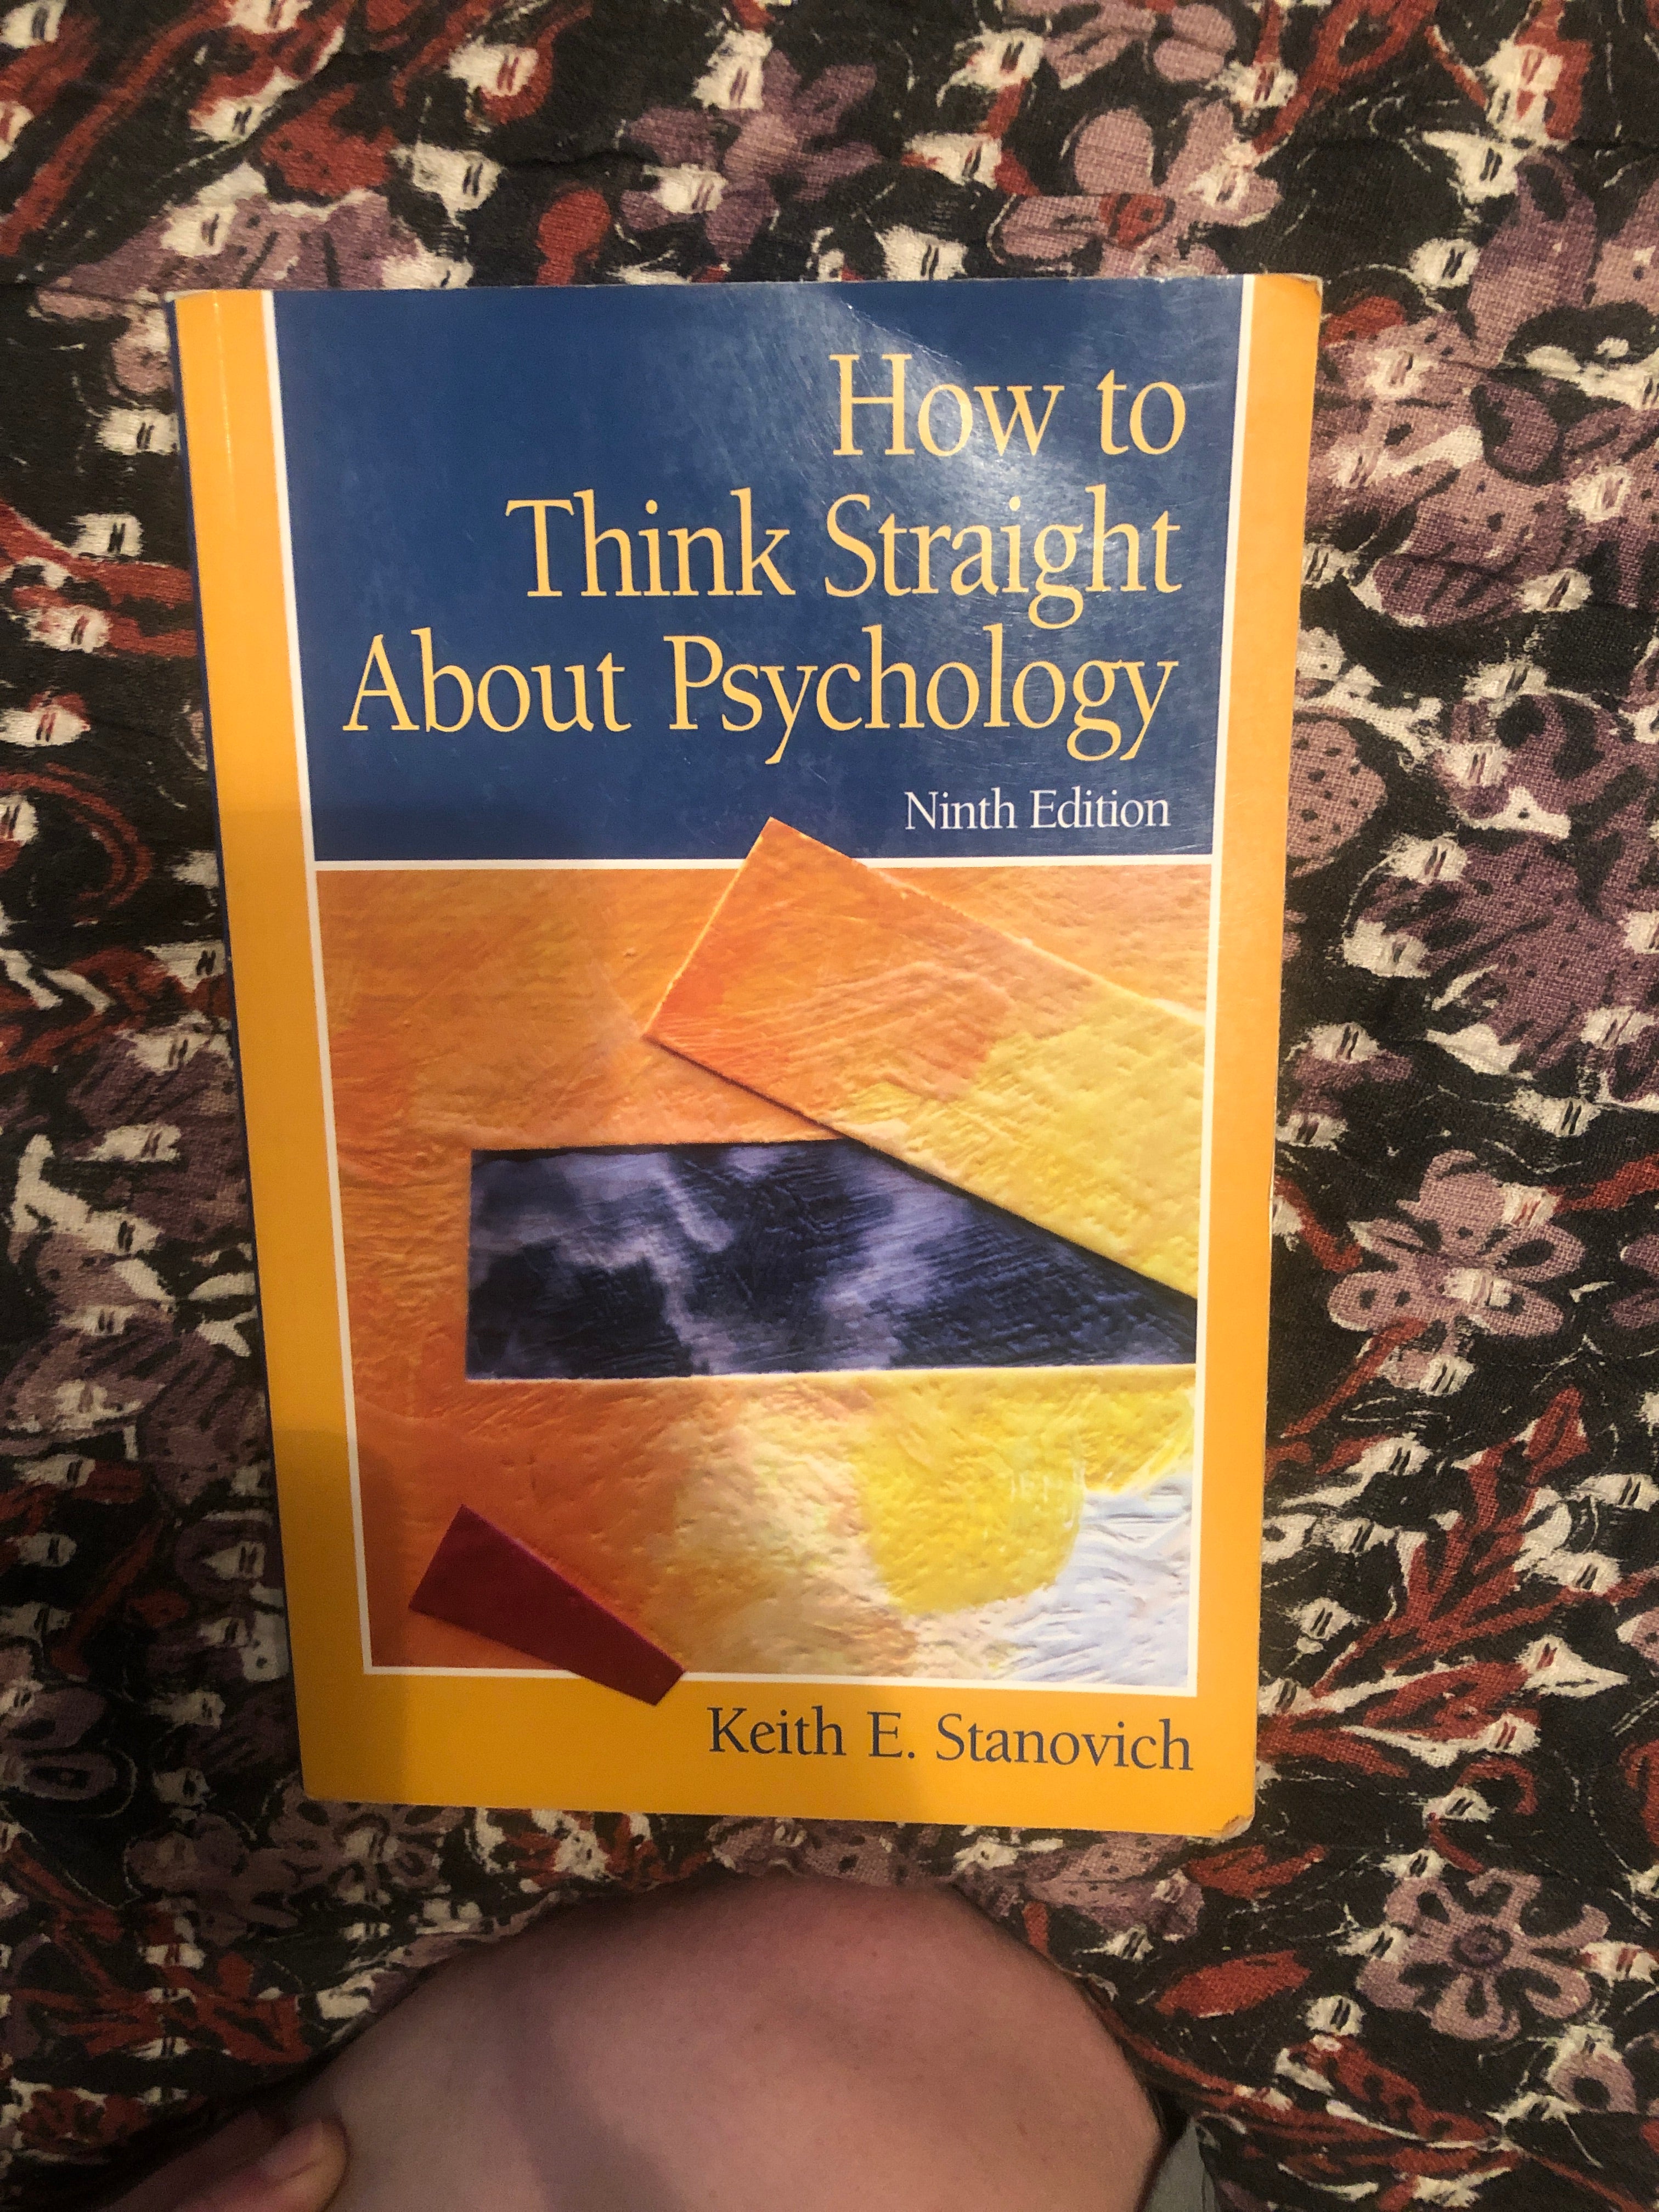 Think　Stanovich,　Psychology　Keith　Straight　Paperback　about　Pangobooks　by　E.　How　to